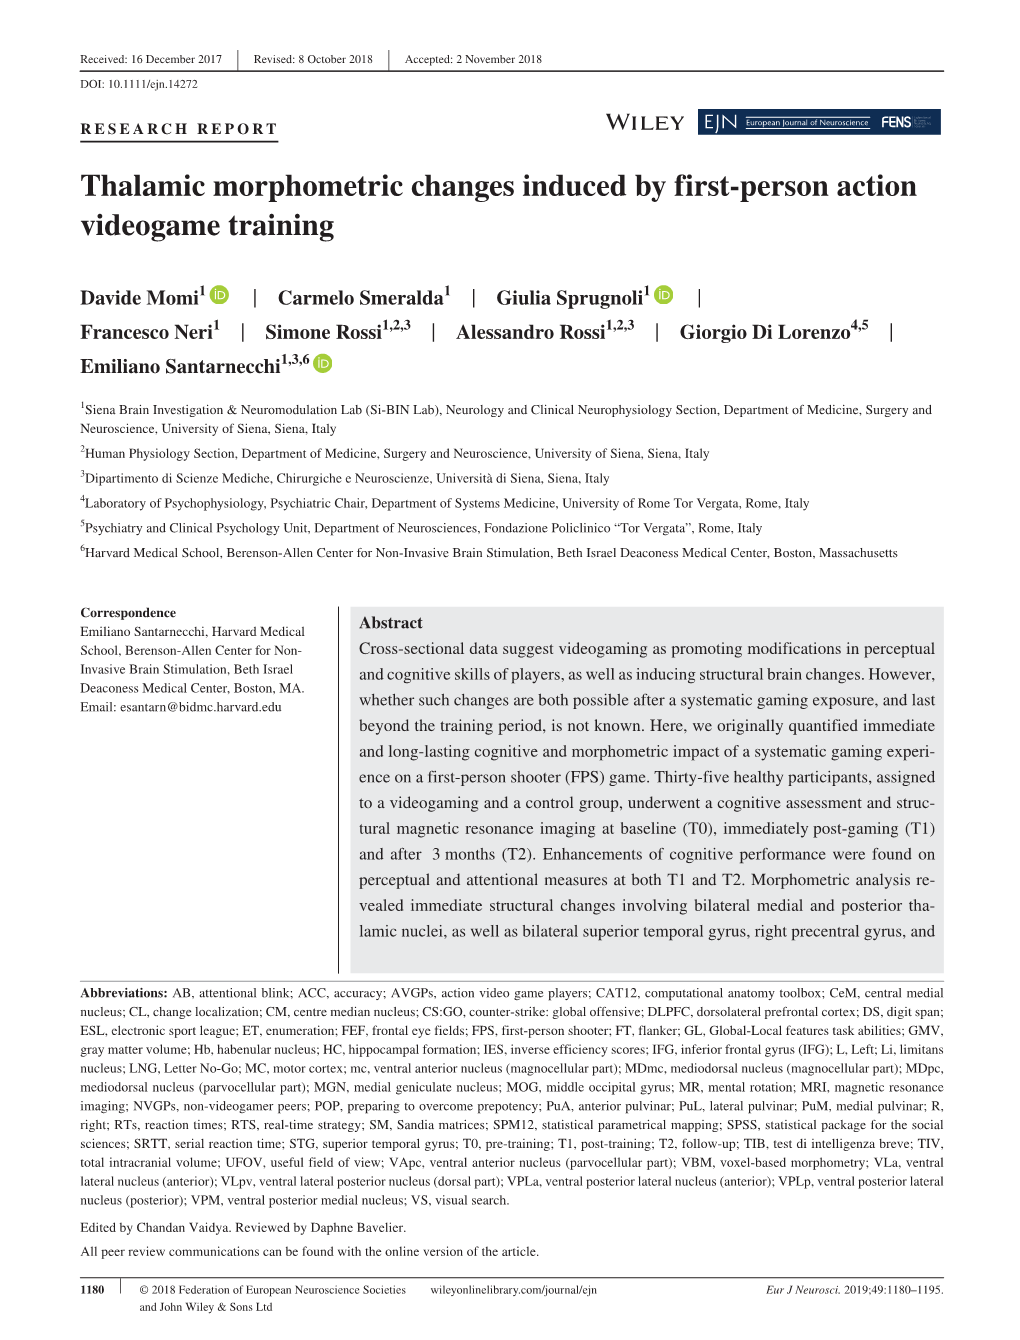 Thalamic Morphometric Changes Induced by First‐Person Action Videogame Training